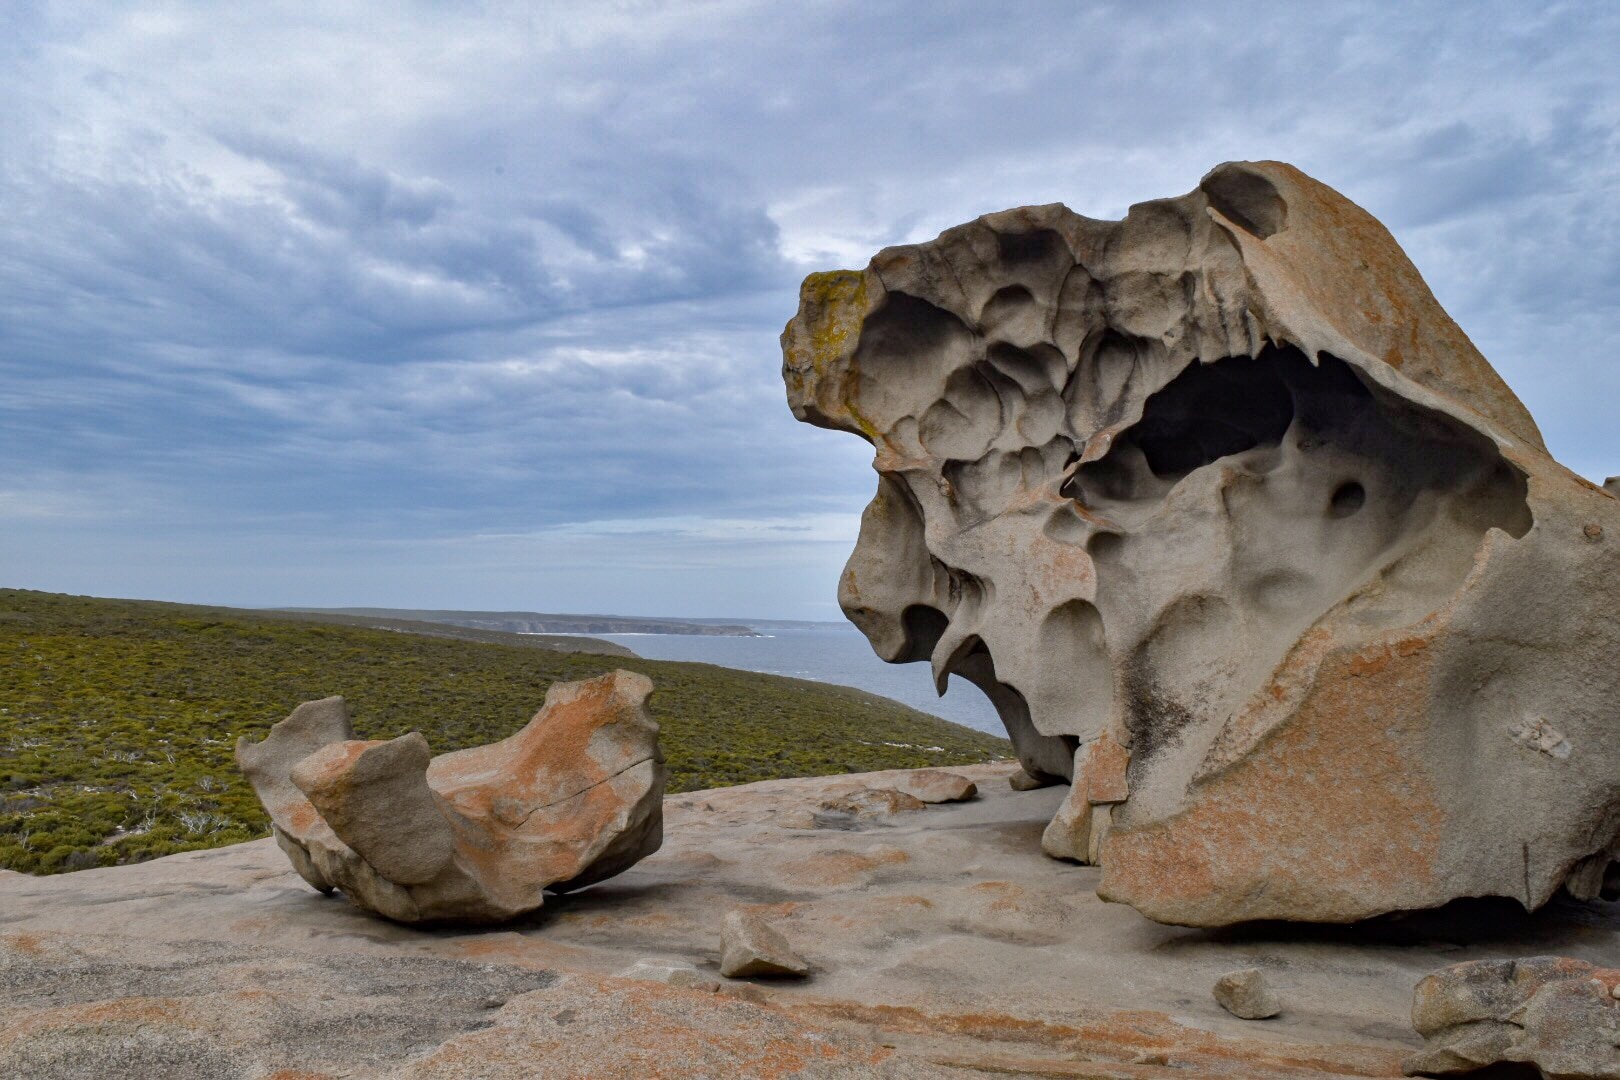 Remarkable Rocks, living up to their name